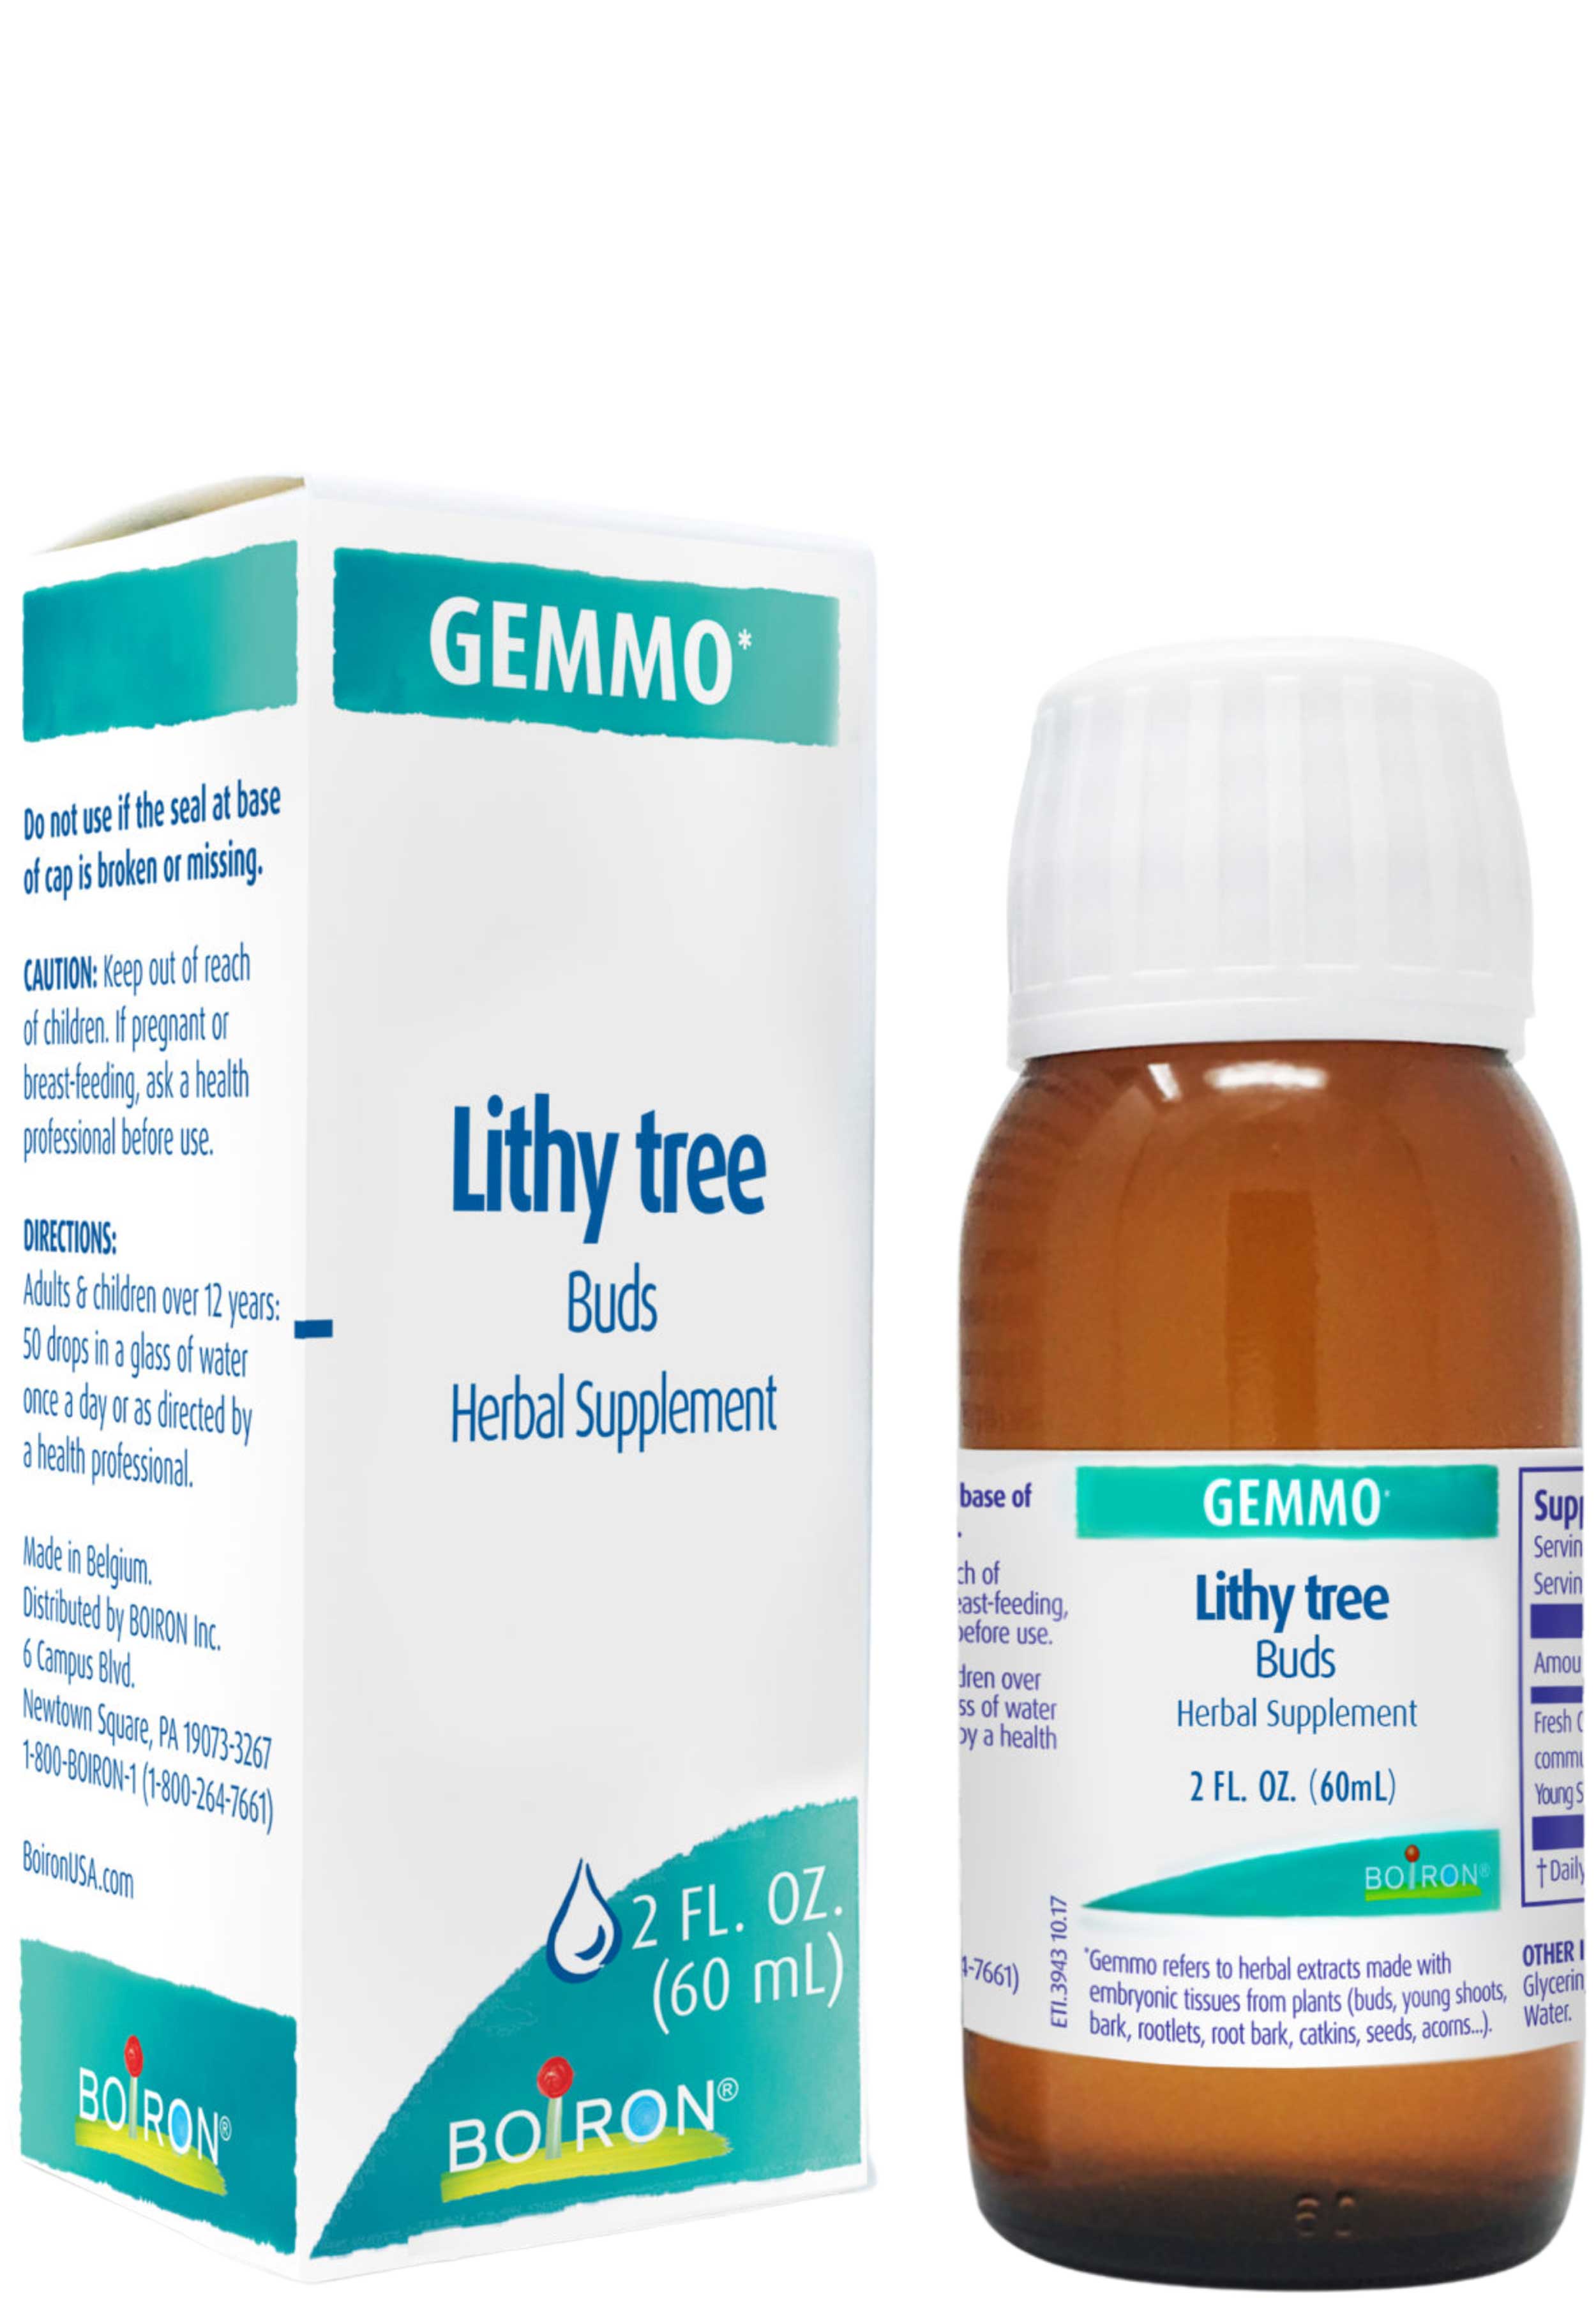 Boiron Homeopathics Gemmo Lithy Tree Buds